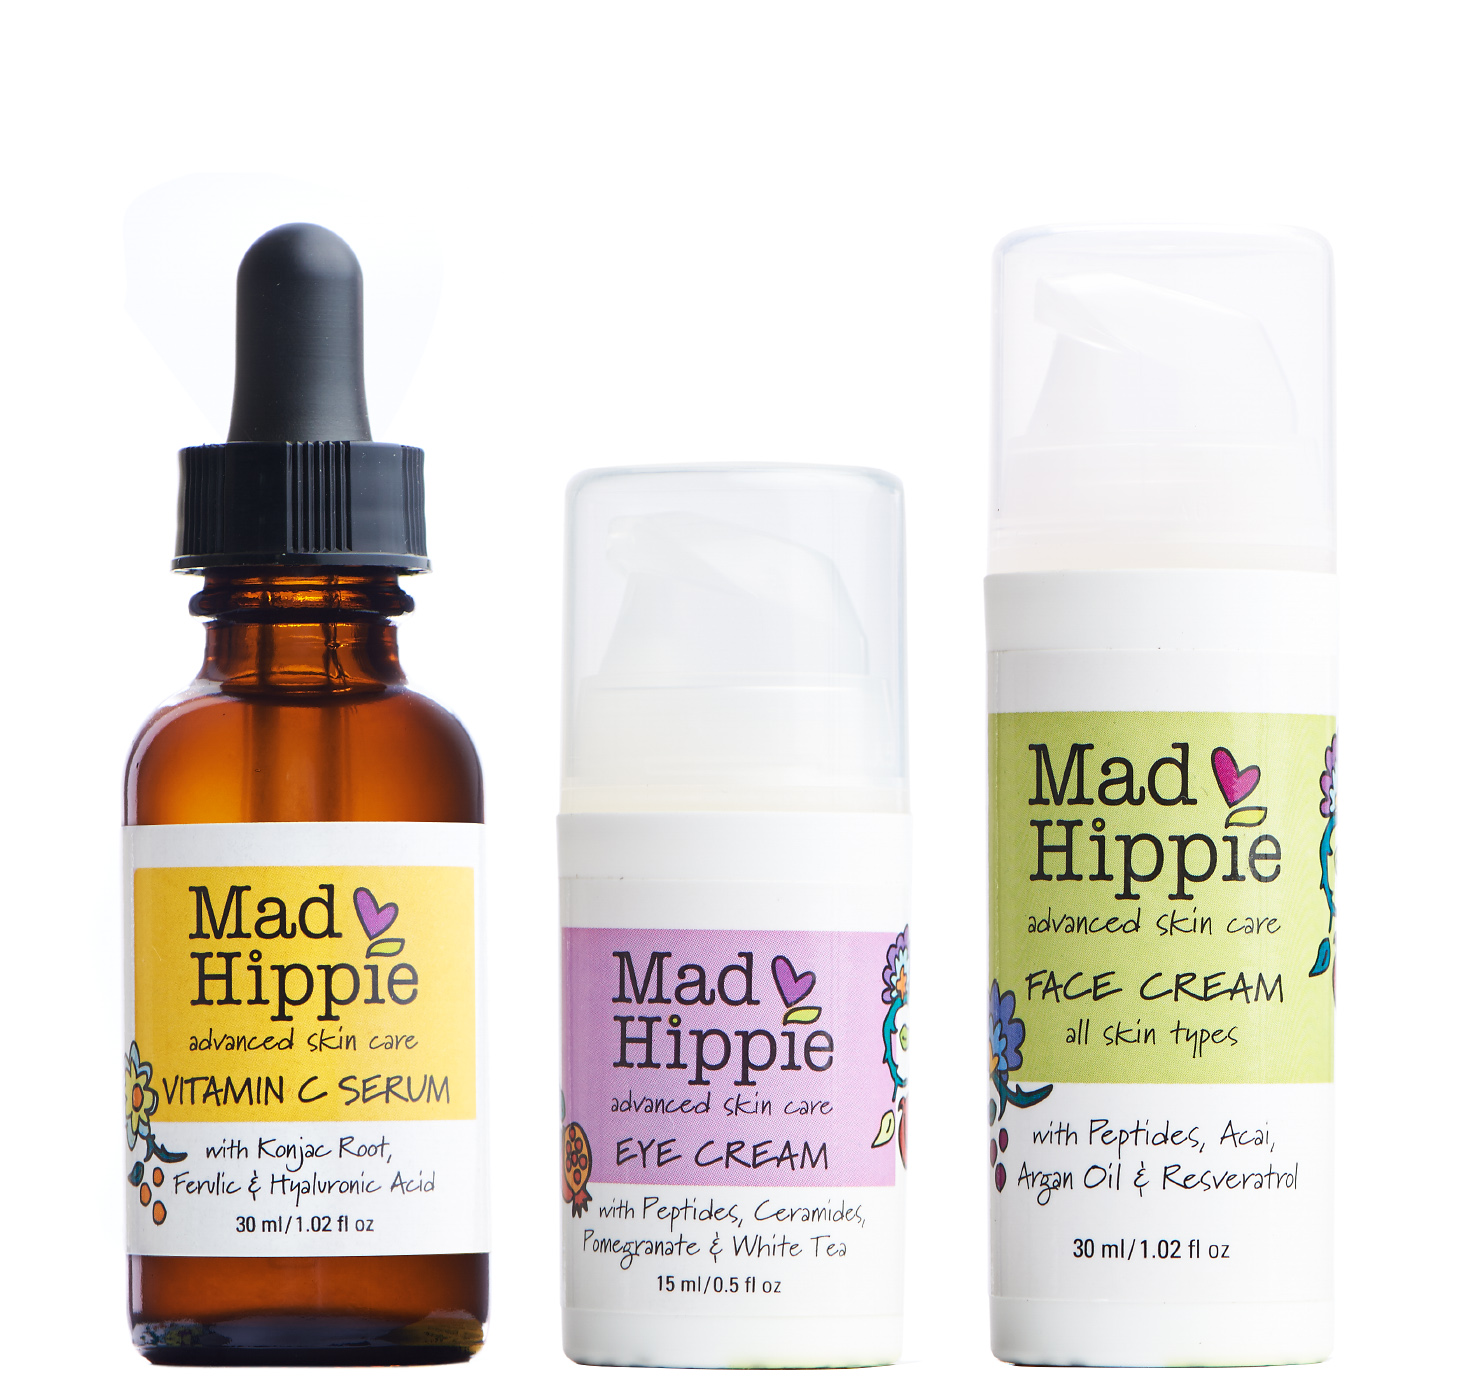 Mad Hippie - Main Product Images - 3 Pack.jpg